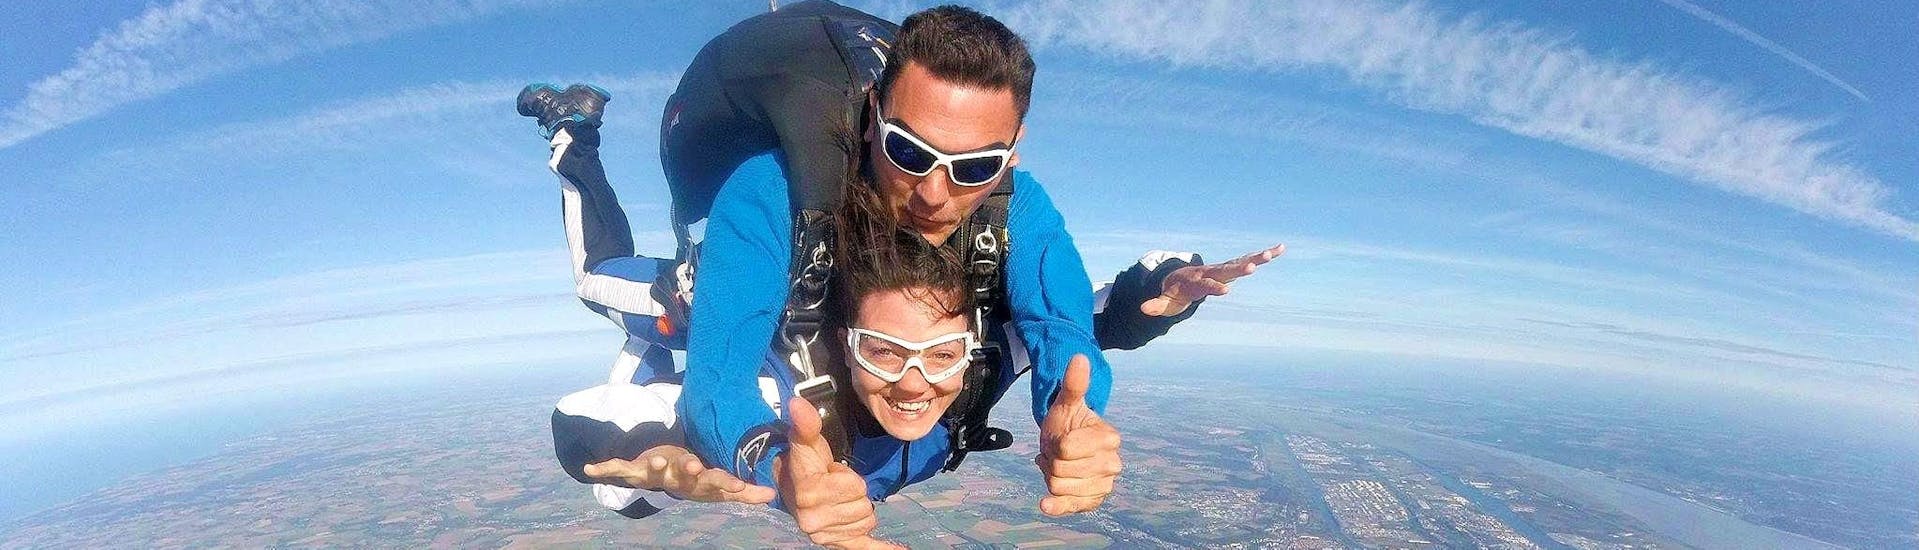 A woman is experiencing freefall with her Paris-Blois Parachutisme tandem skydiving instructor during her Tandem Skydive in Blois.